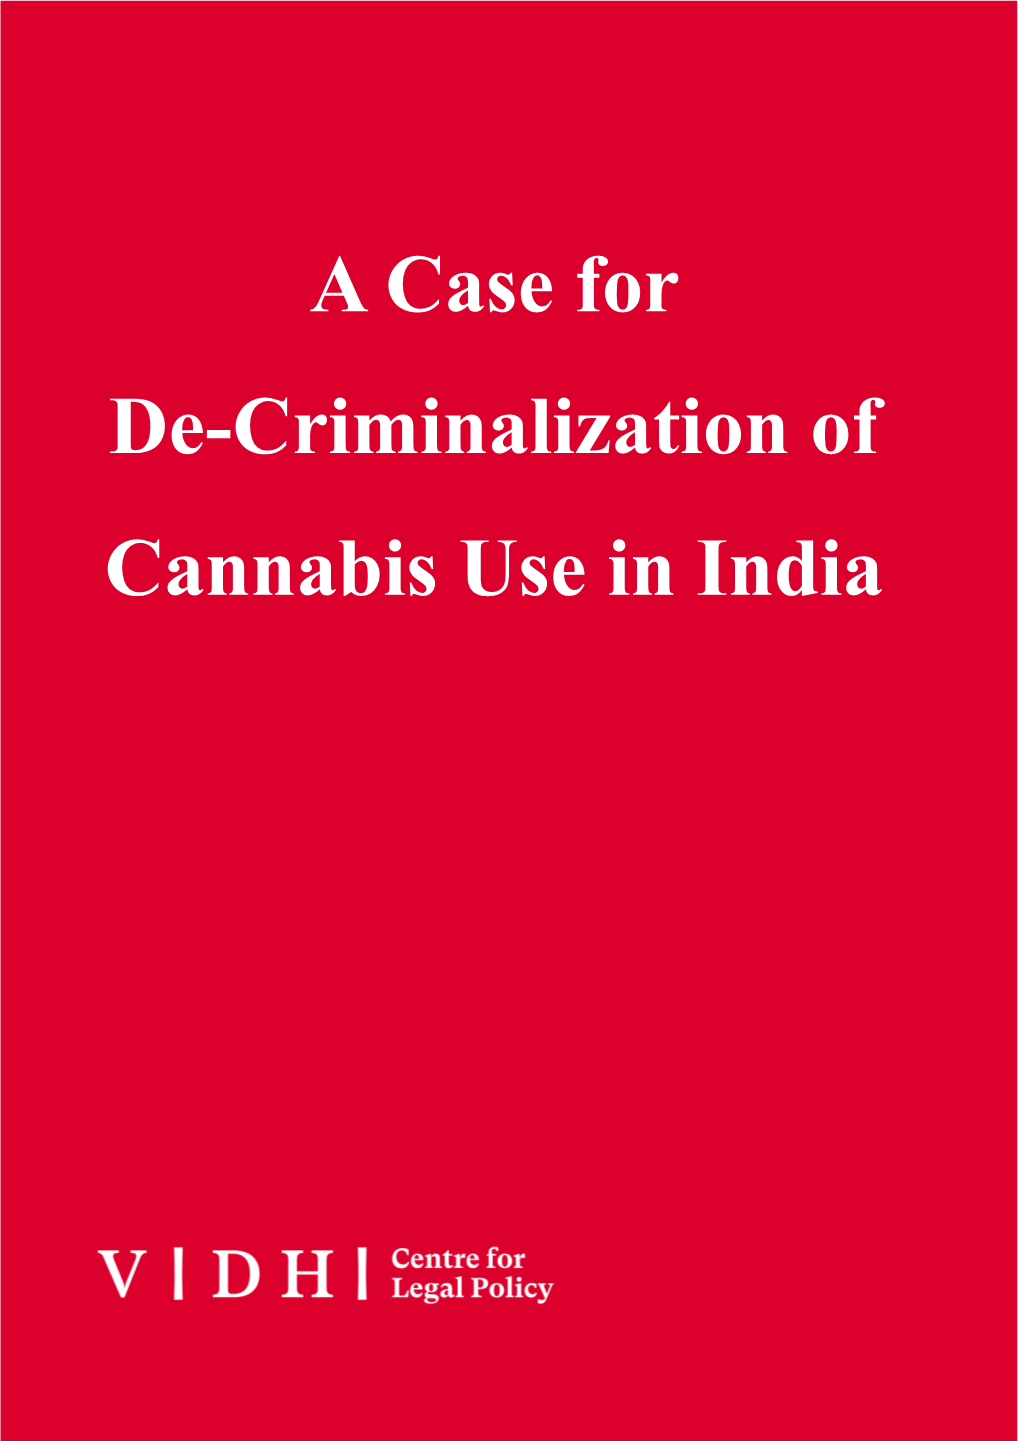 A Case for De-Criminalization of Cannabis Use in India